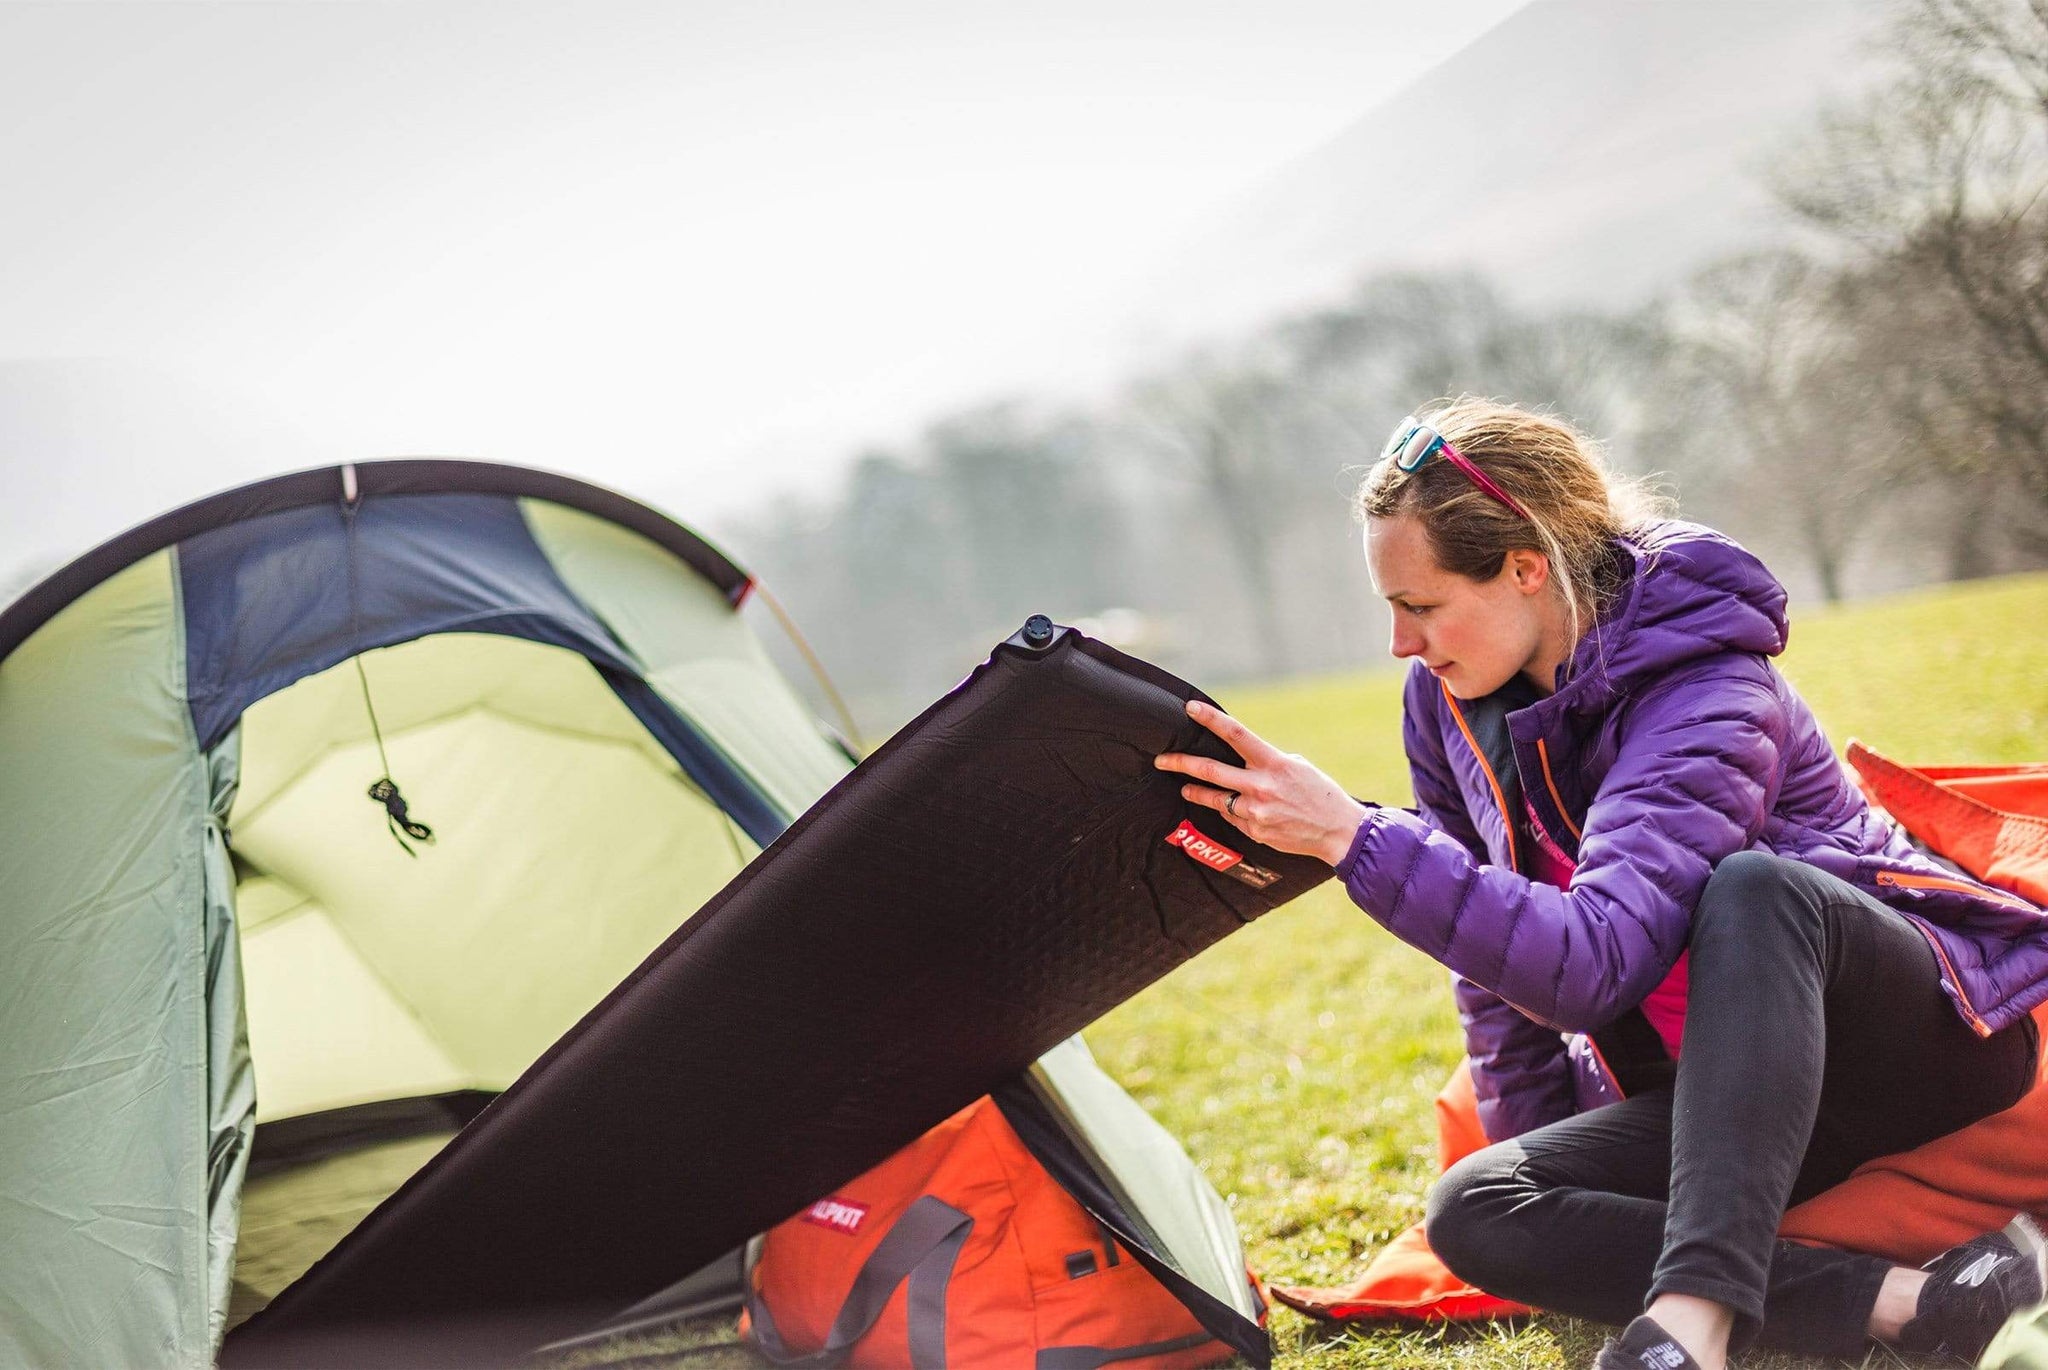 Pushing a Dirtbag self-inflating sleeping mat into the tent in the Peak District